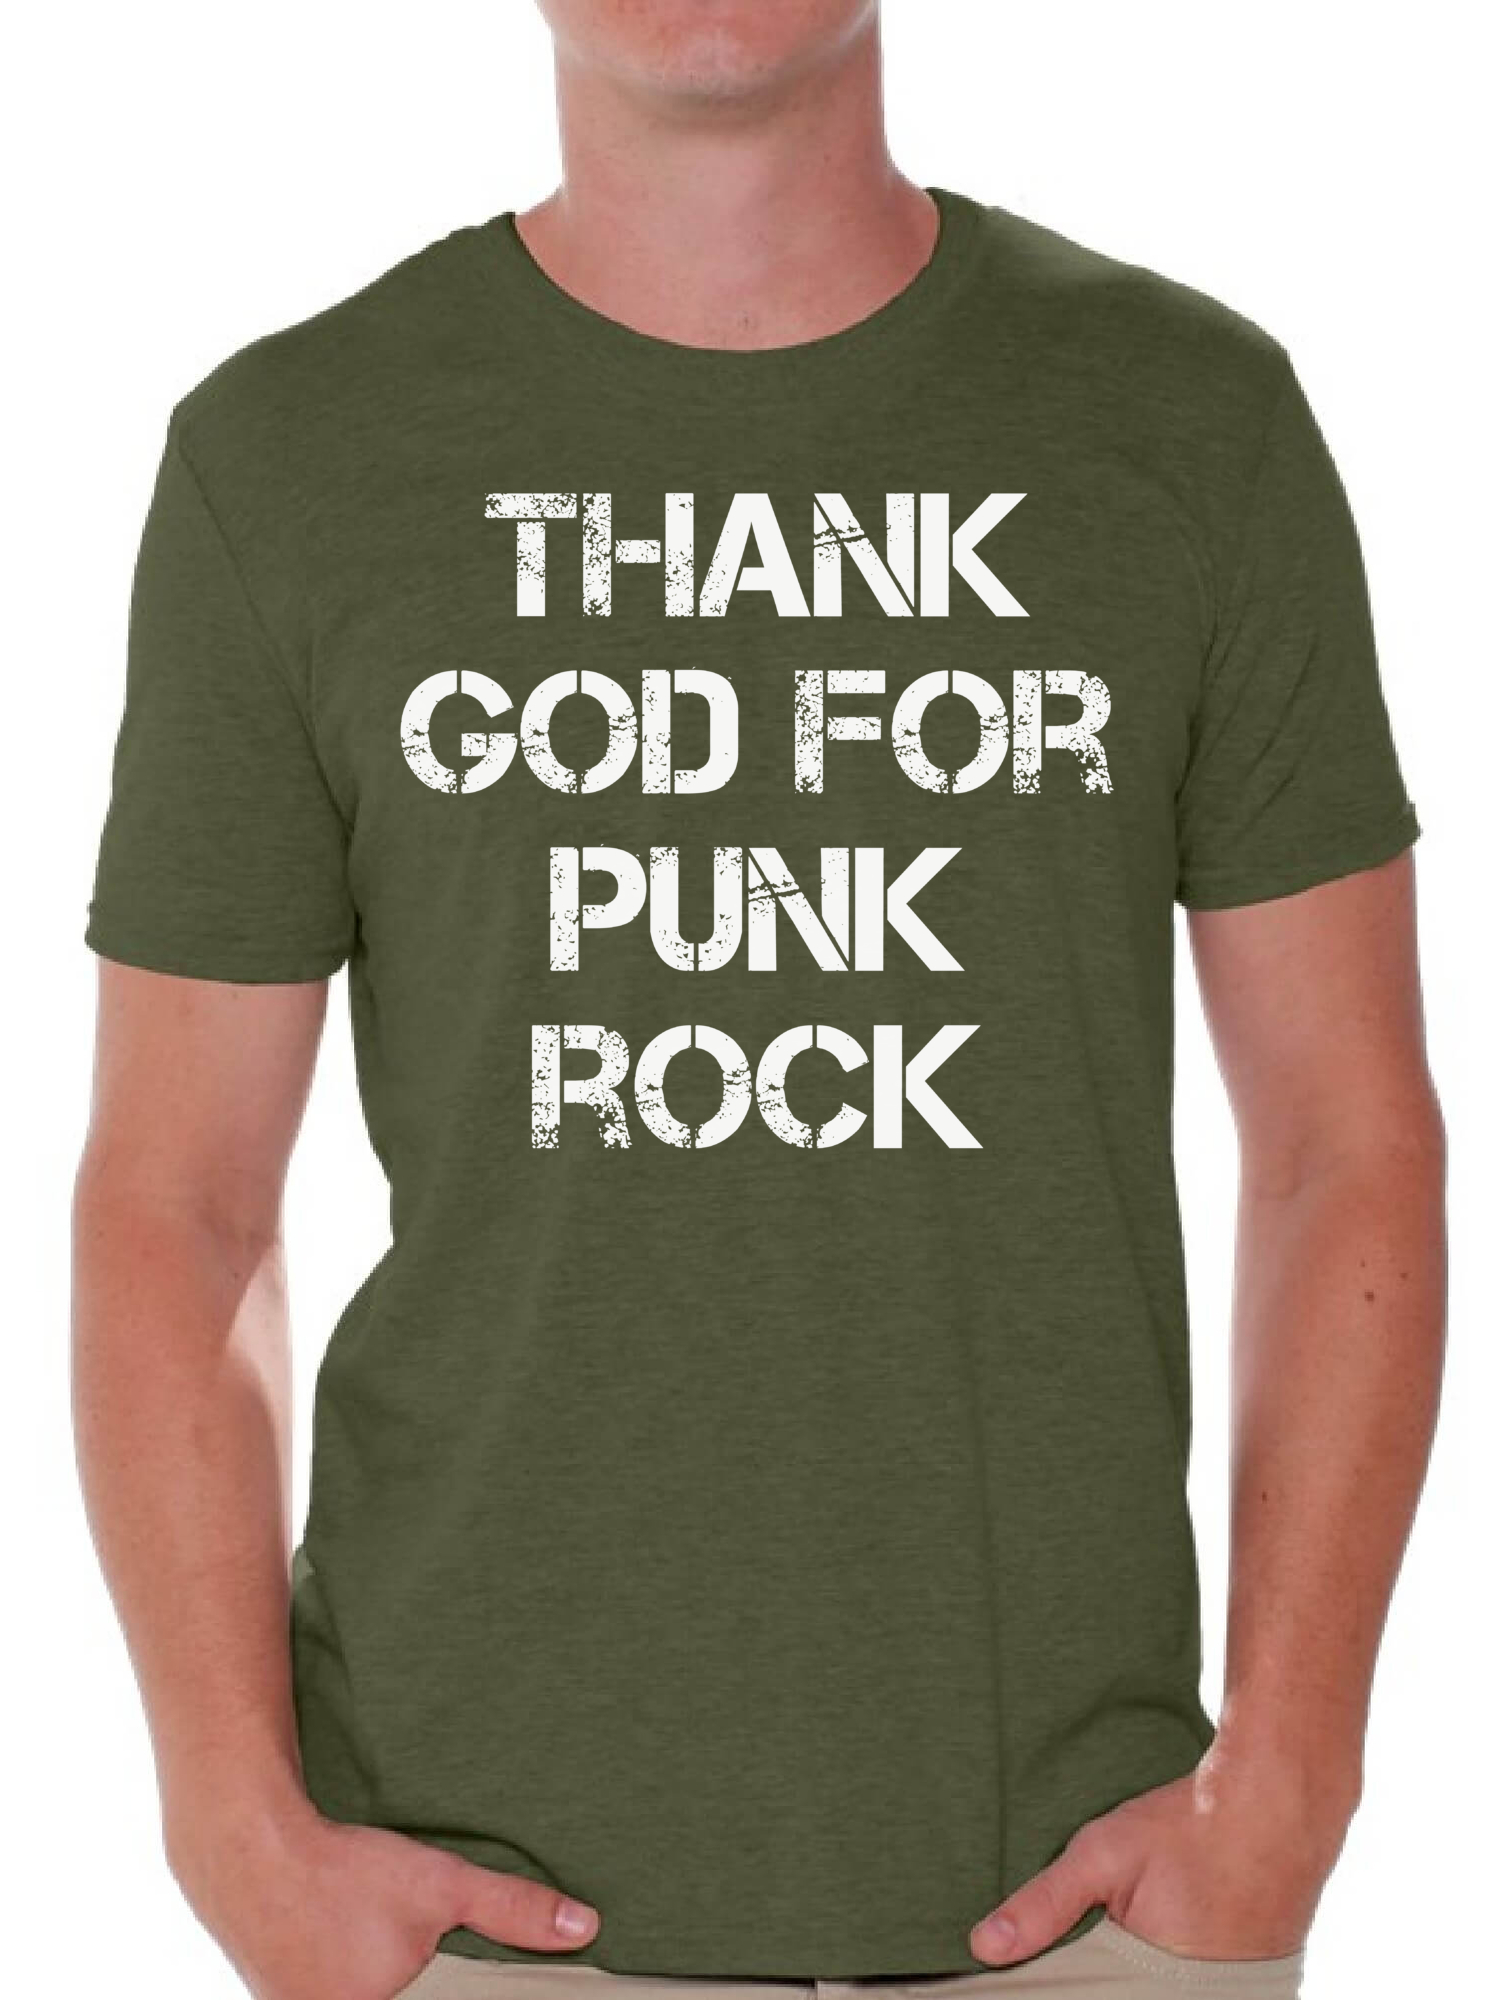 Awkward Styles Thank God for Punk Rock T Shirt for Men Christian Mens Shirts Christian Clothes for Husband Religious Shirt Christian Birthday Gifts Jesus Shirts Coffee Clothing Punk Rock Mens T Shirt - image 1 of 4